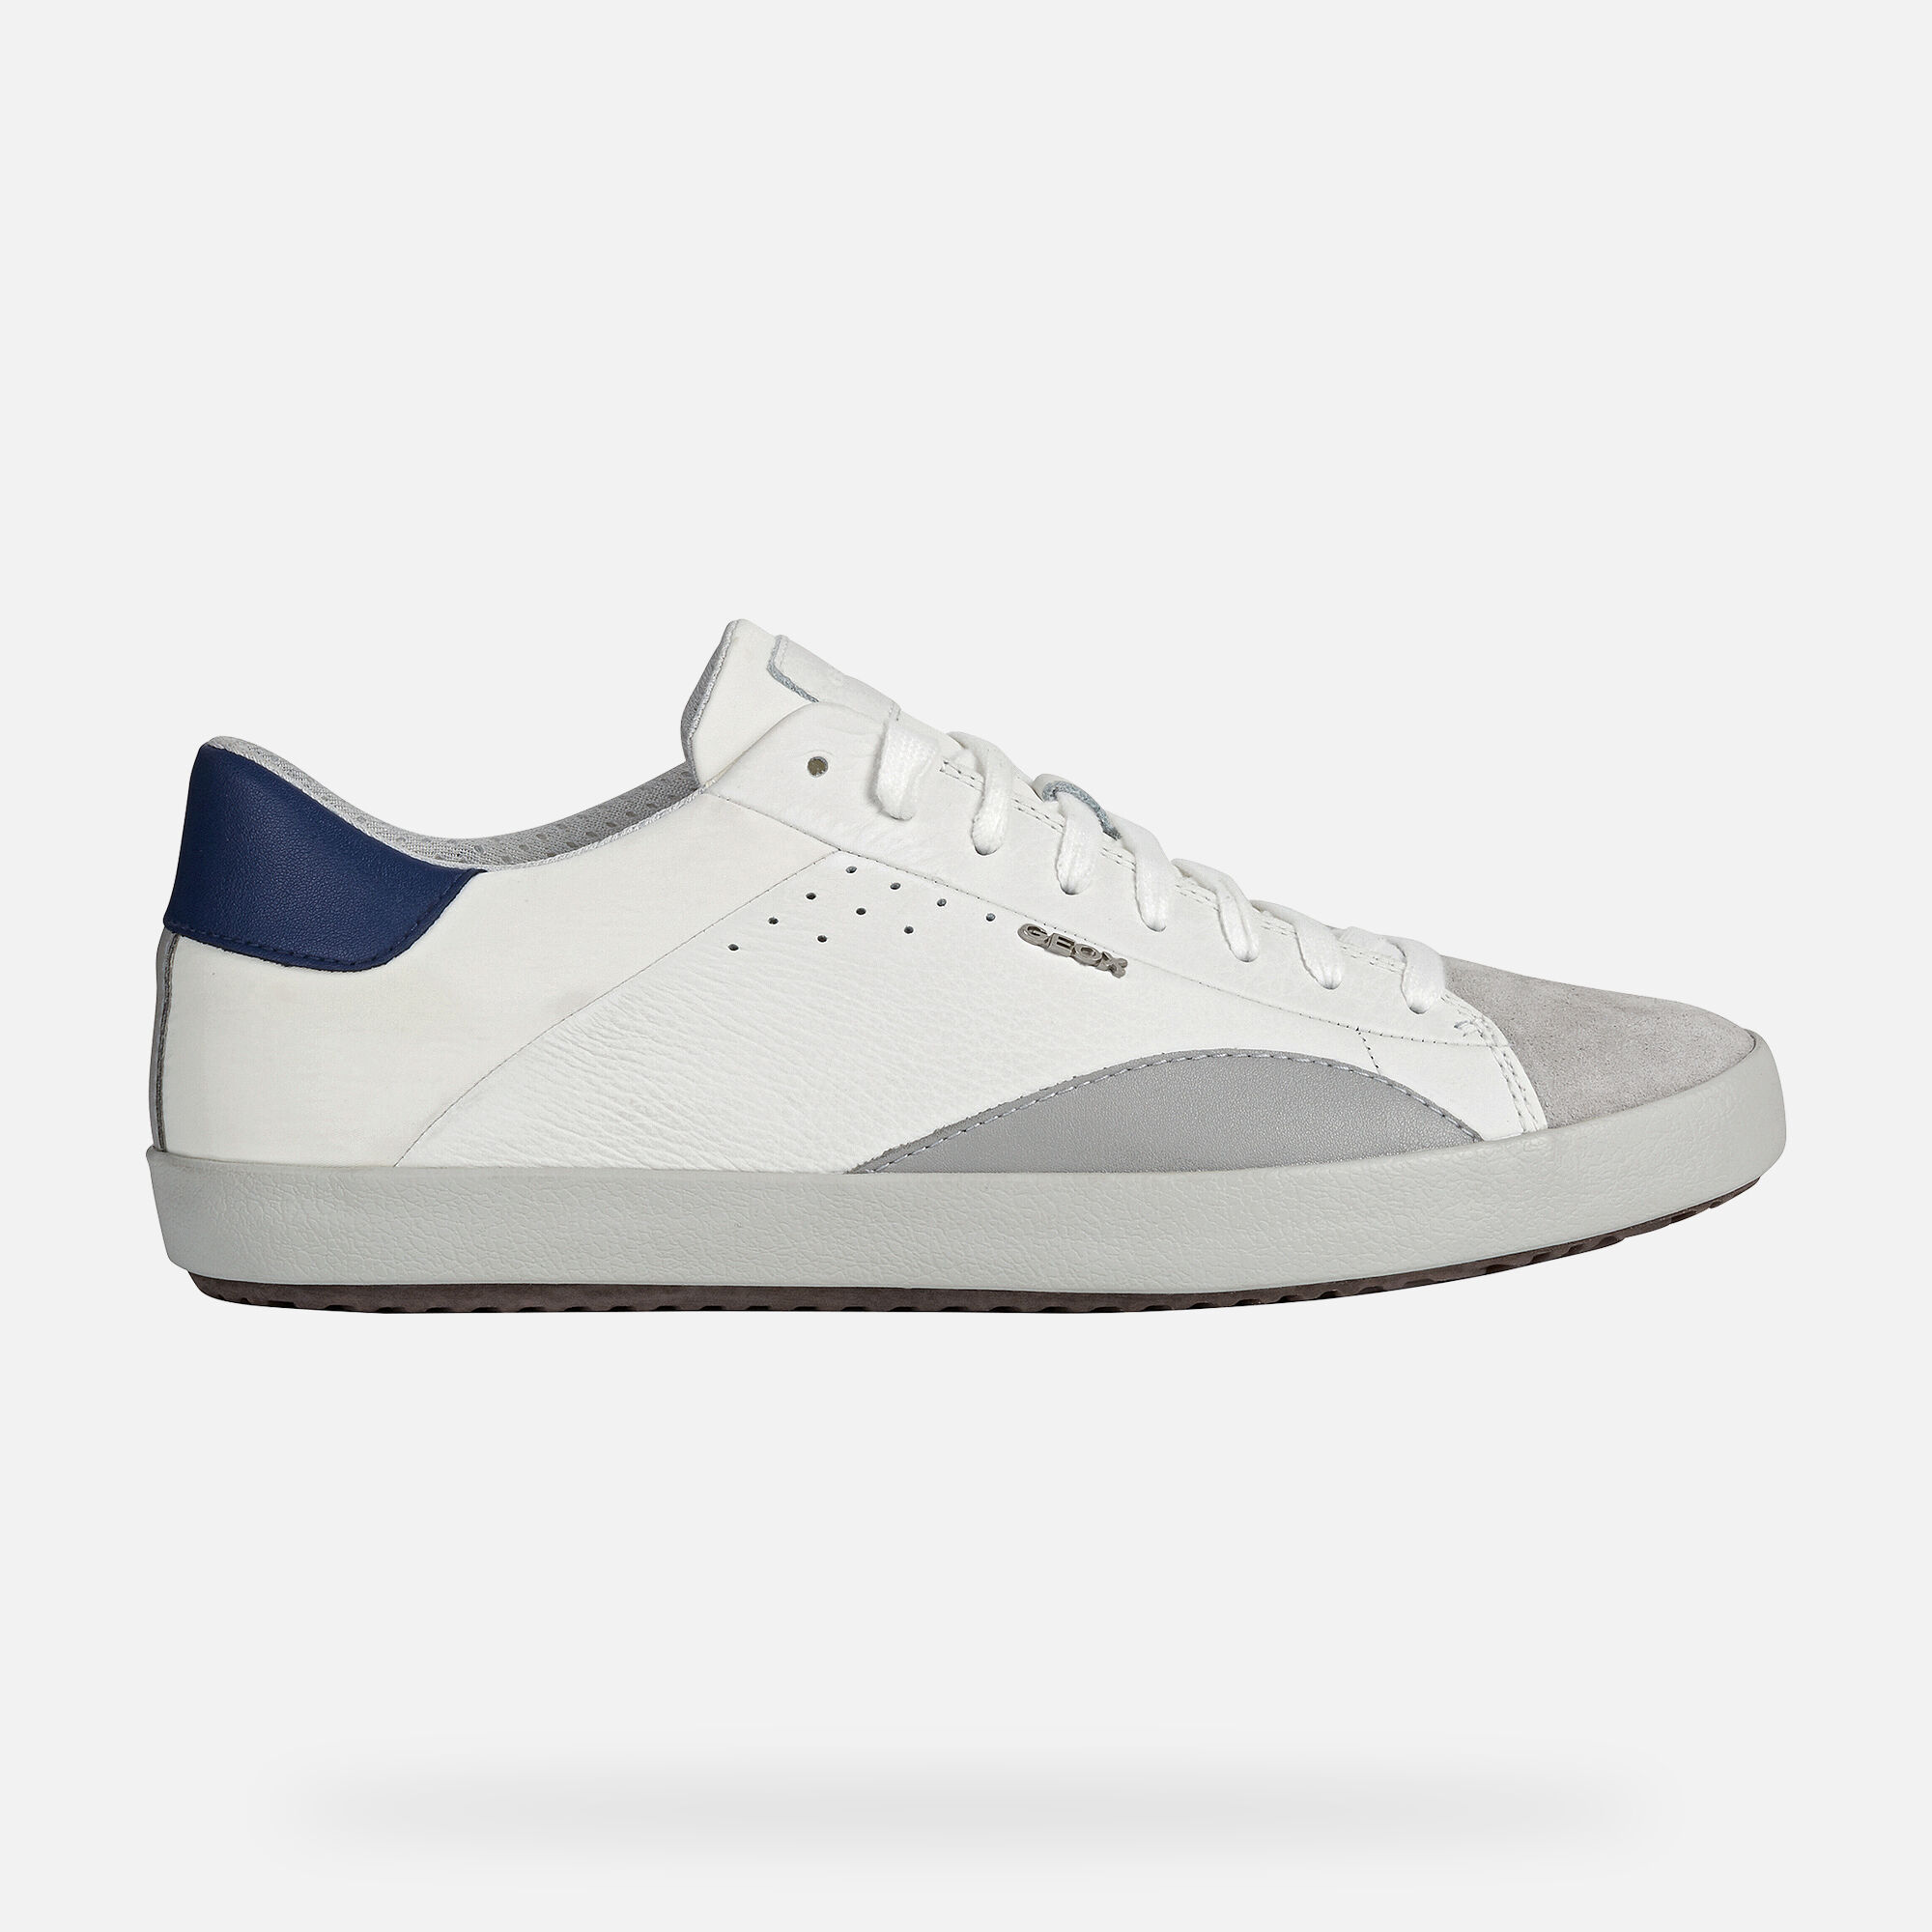 Geox WARLEY Sneakers Bianche Uomo | Collezione Geox® 2020